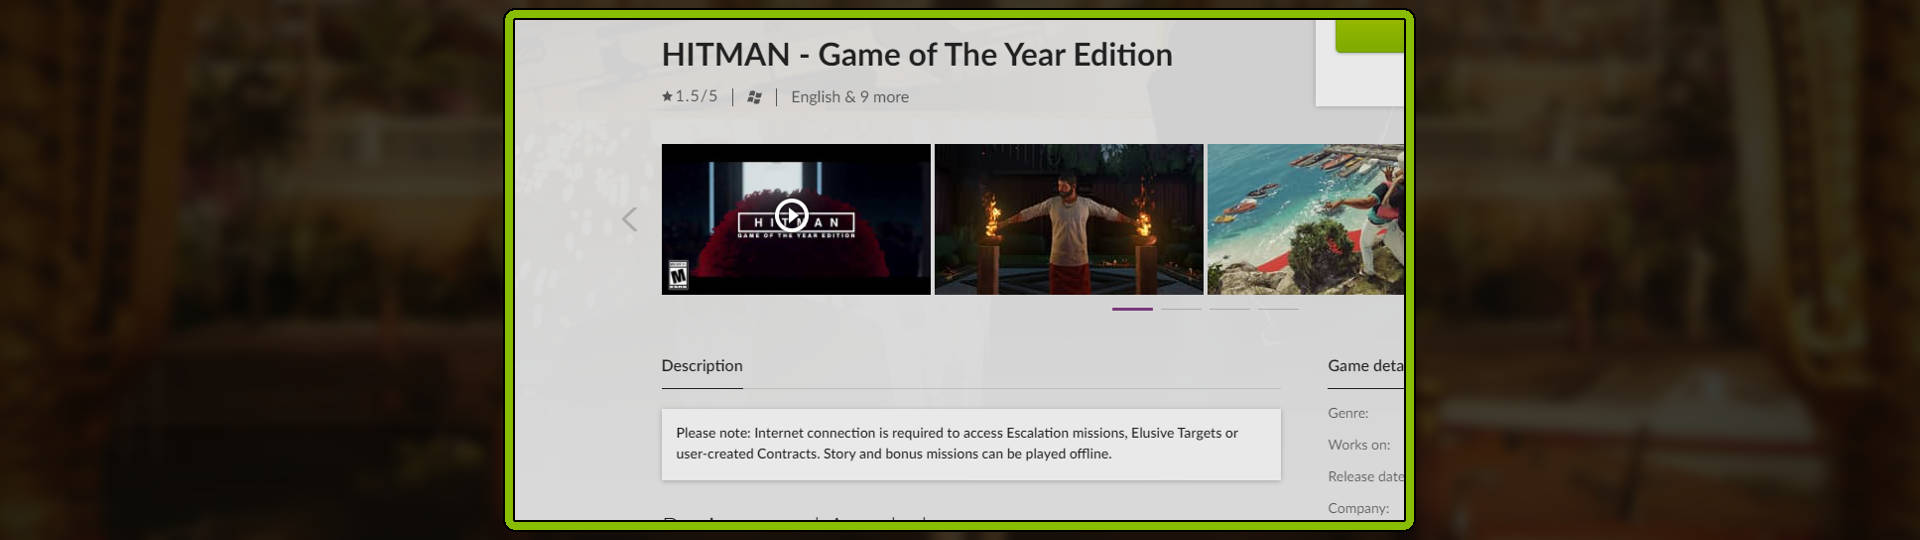 Hitman: Game of the Year Edition GOG Review Bomb slice